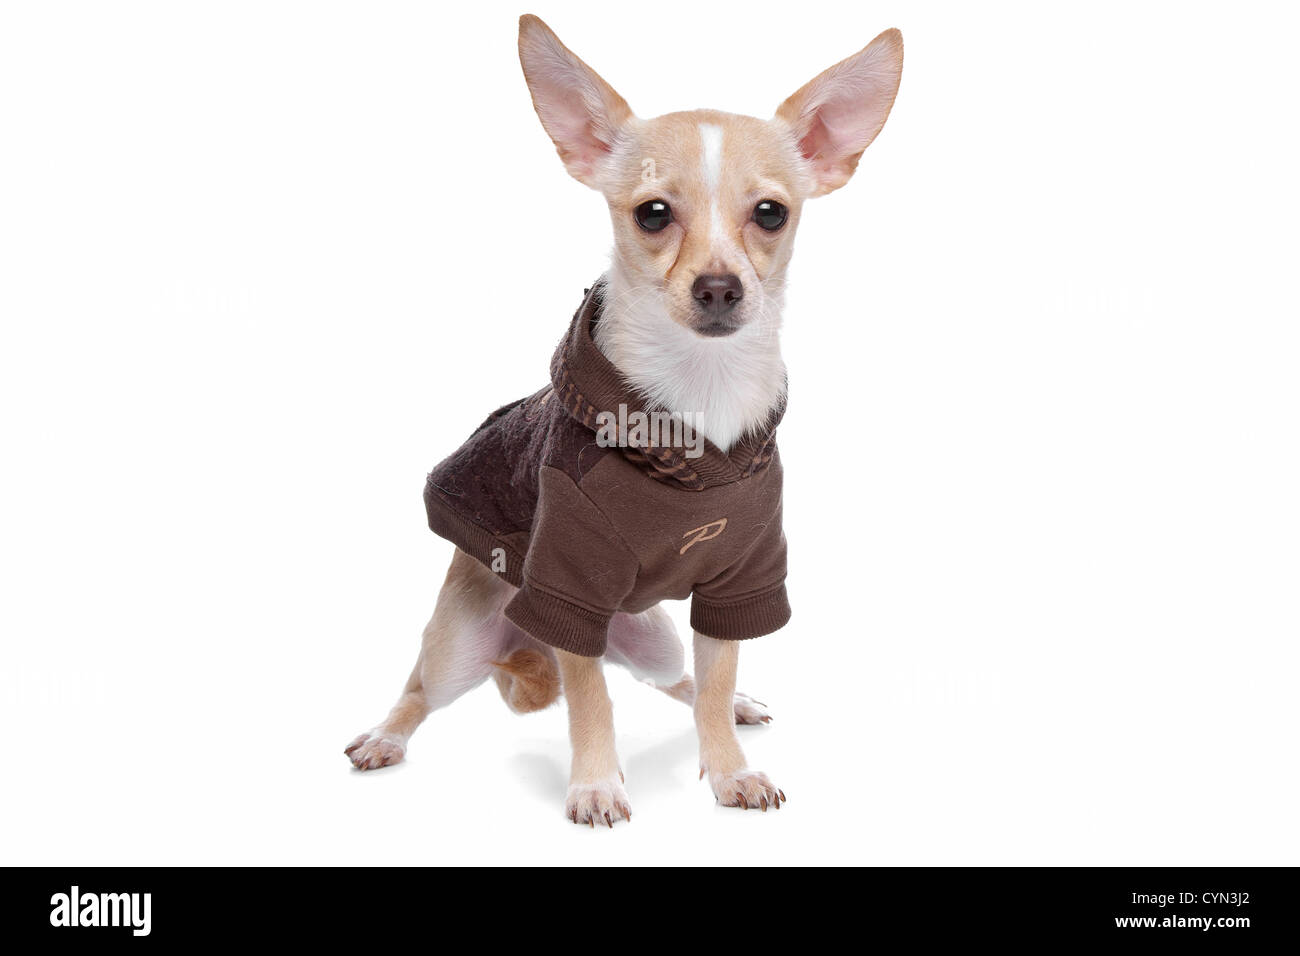 https://c8.alamy.com/comp/CYN3J2/chihuahua-dog-in-front-of-a-white-background-CYN3J2.jpg